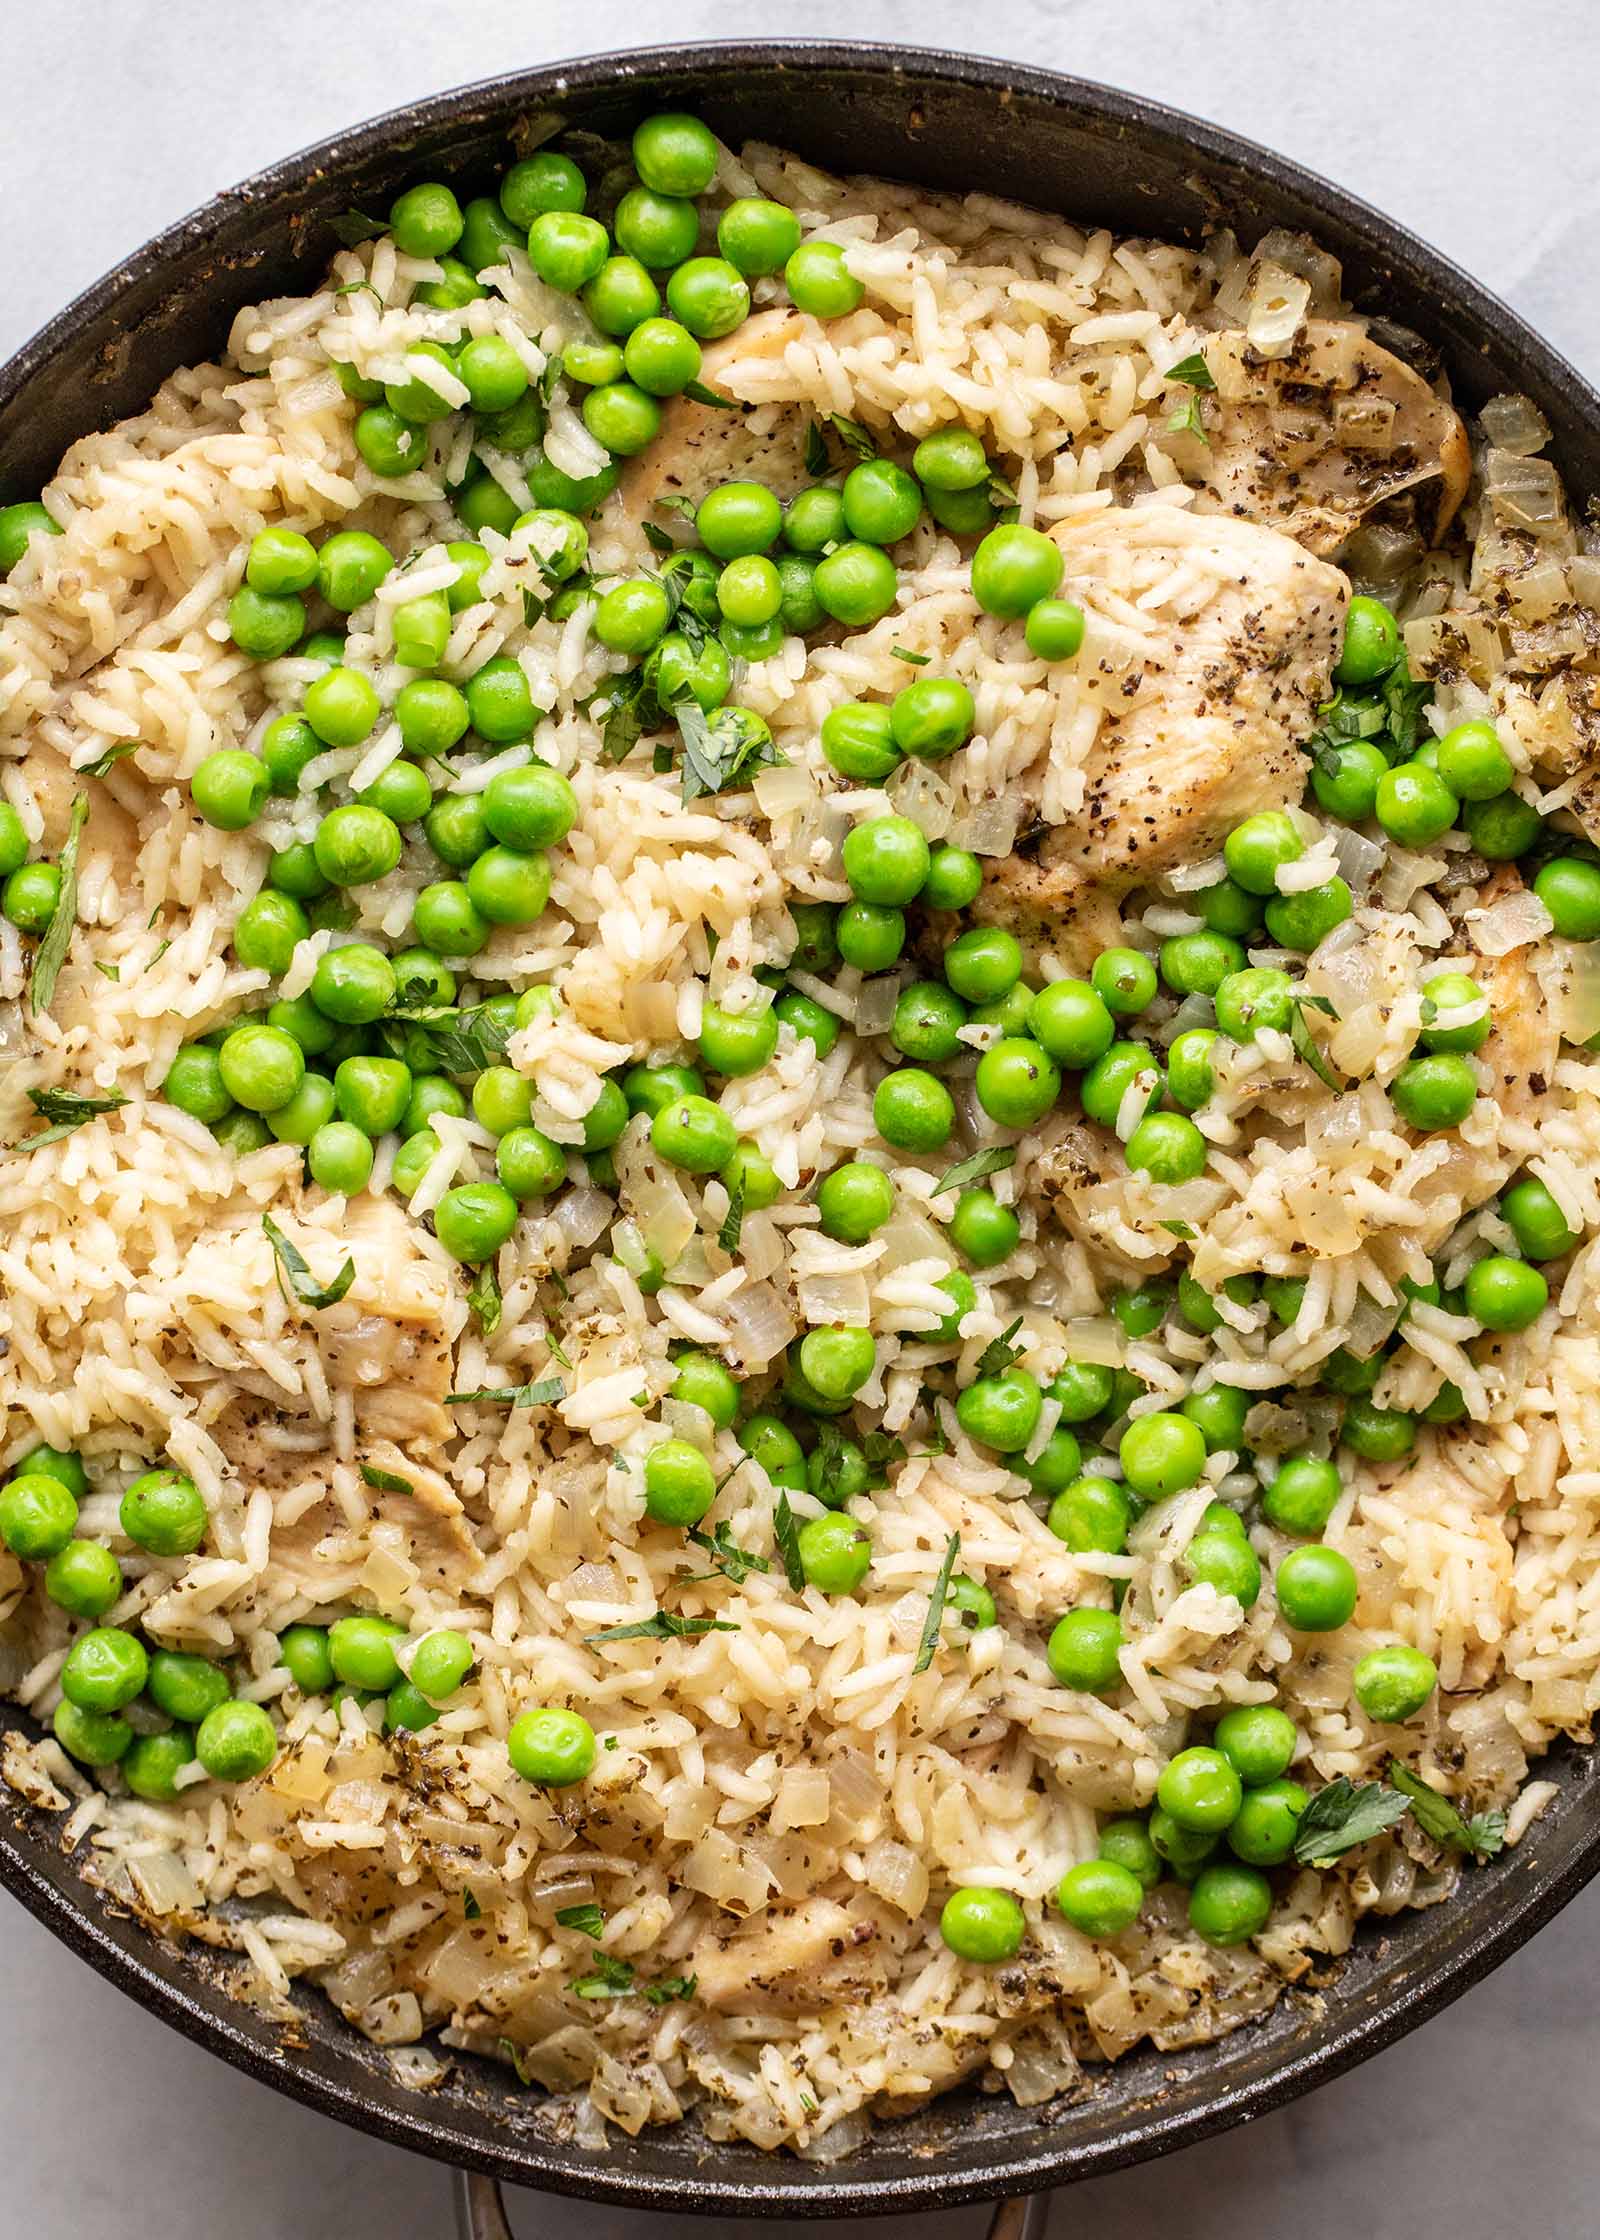 Chicken and rice with peas made in a skillet on the stove